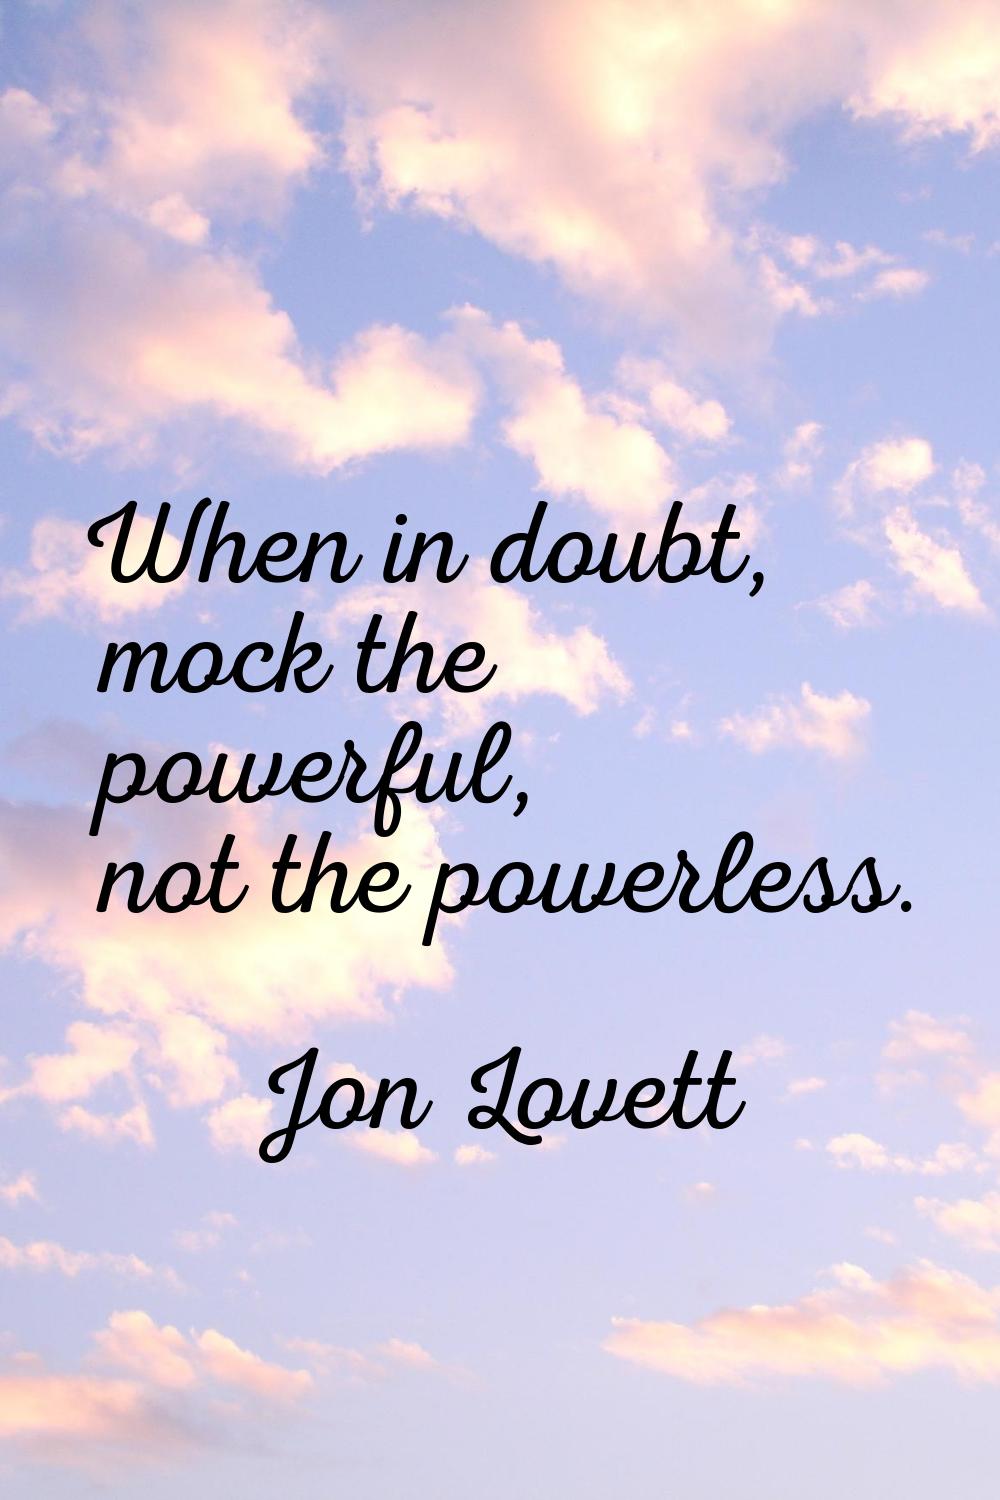 When in doubt, mock the powerful, not the powerless.